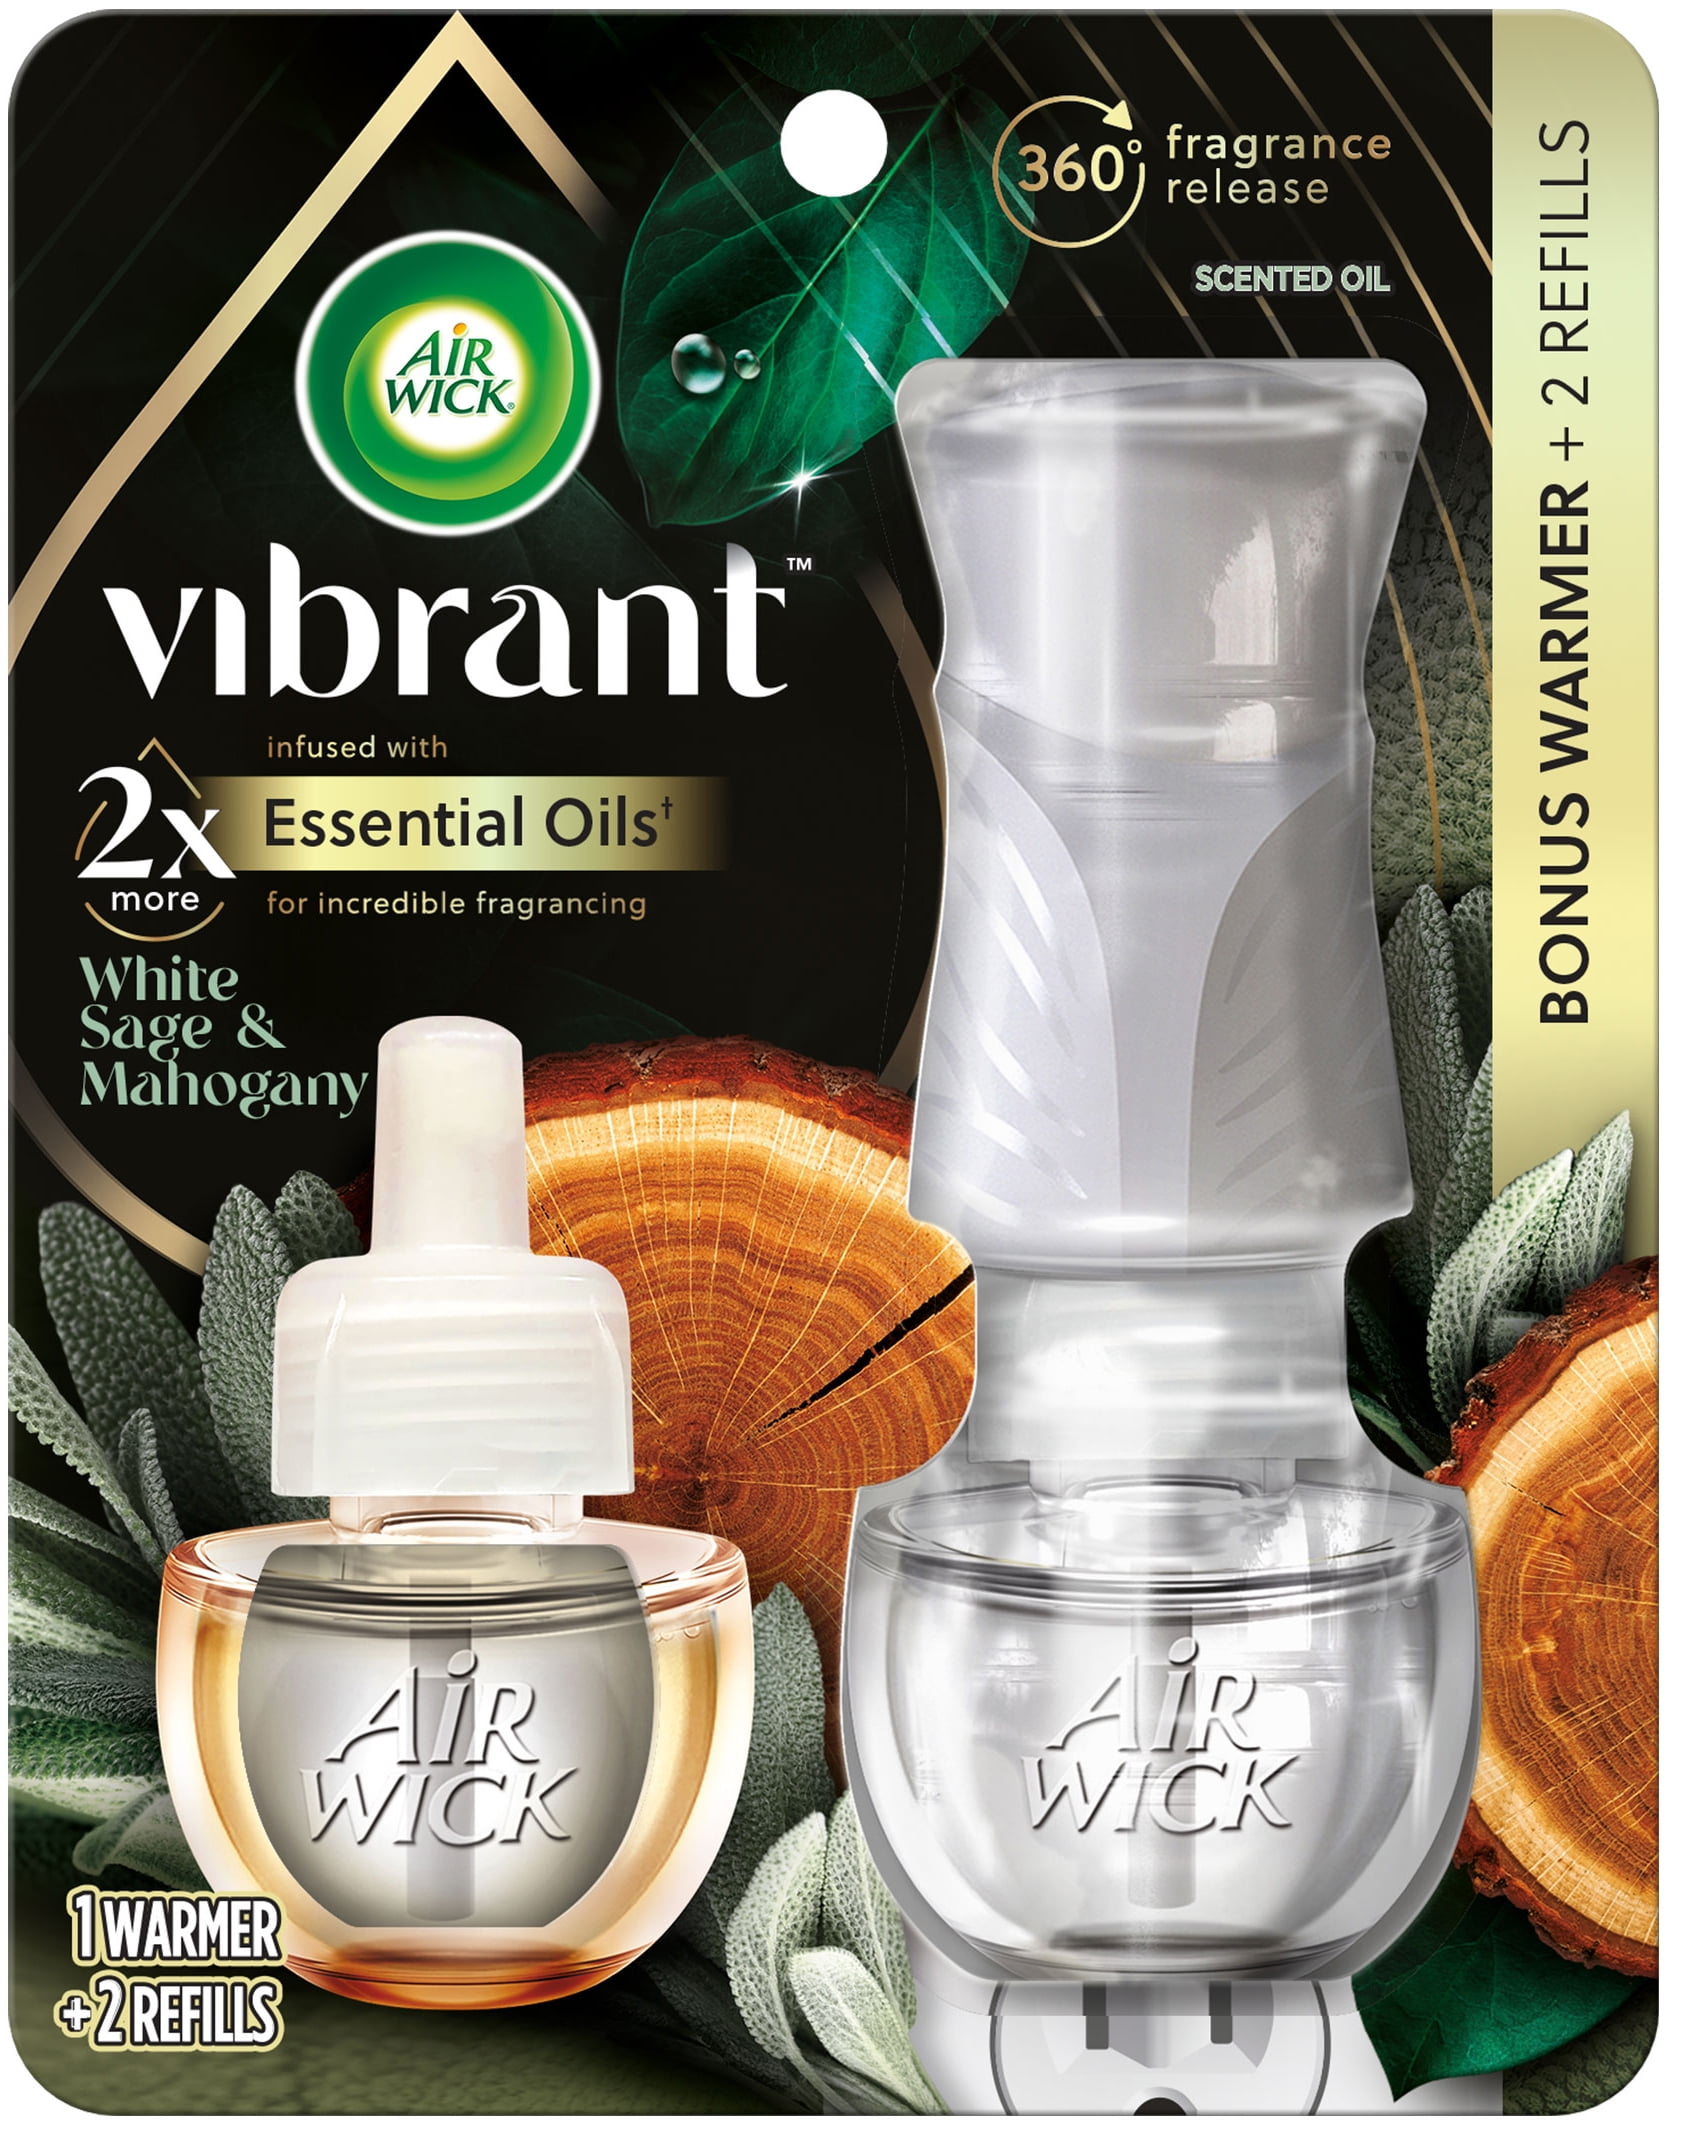 Air Wick Vibrant Plug in Scented Oil Starter Kit (Gadget + 2 Refills), White Sage & Mahogany, Air Freshener, Essential Oils